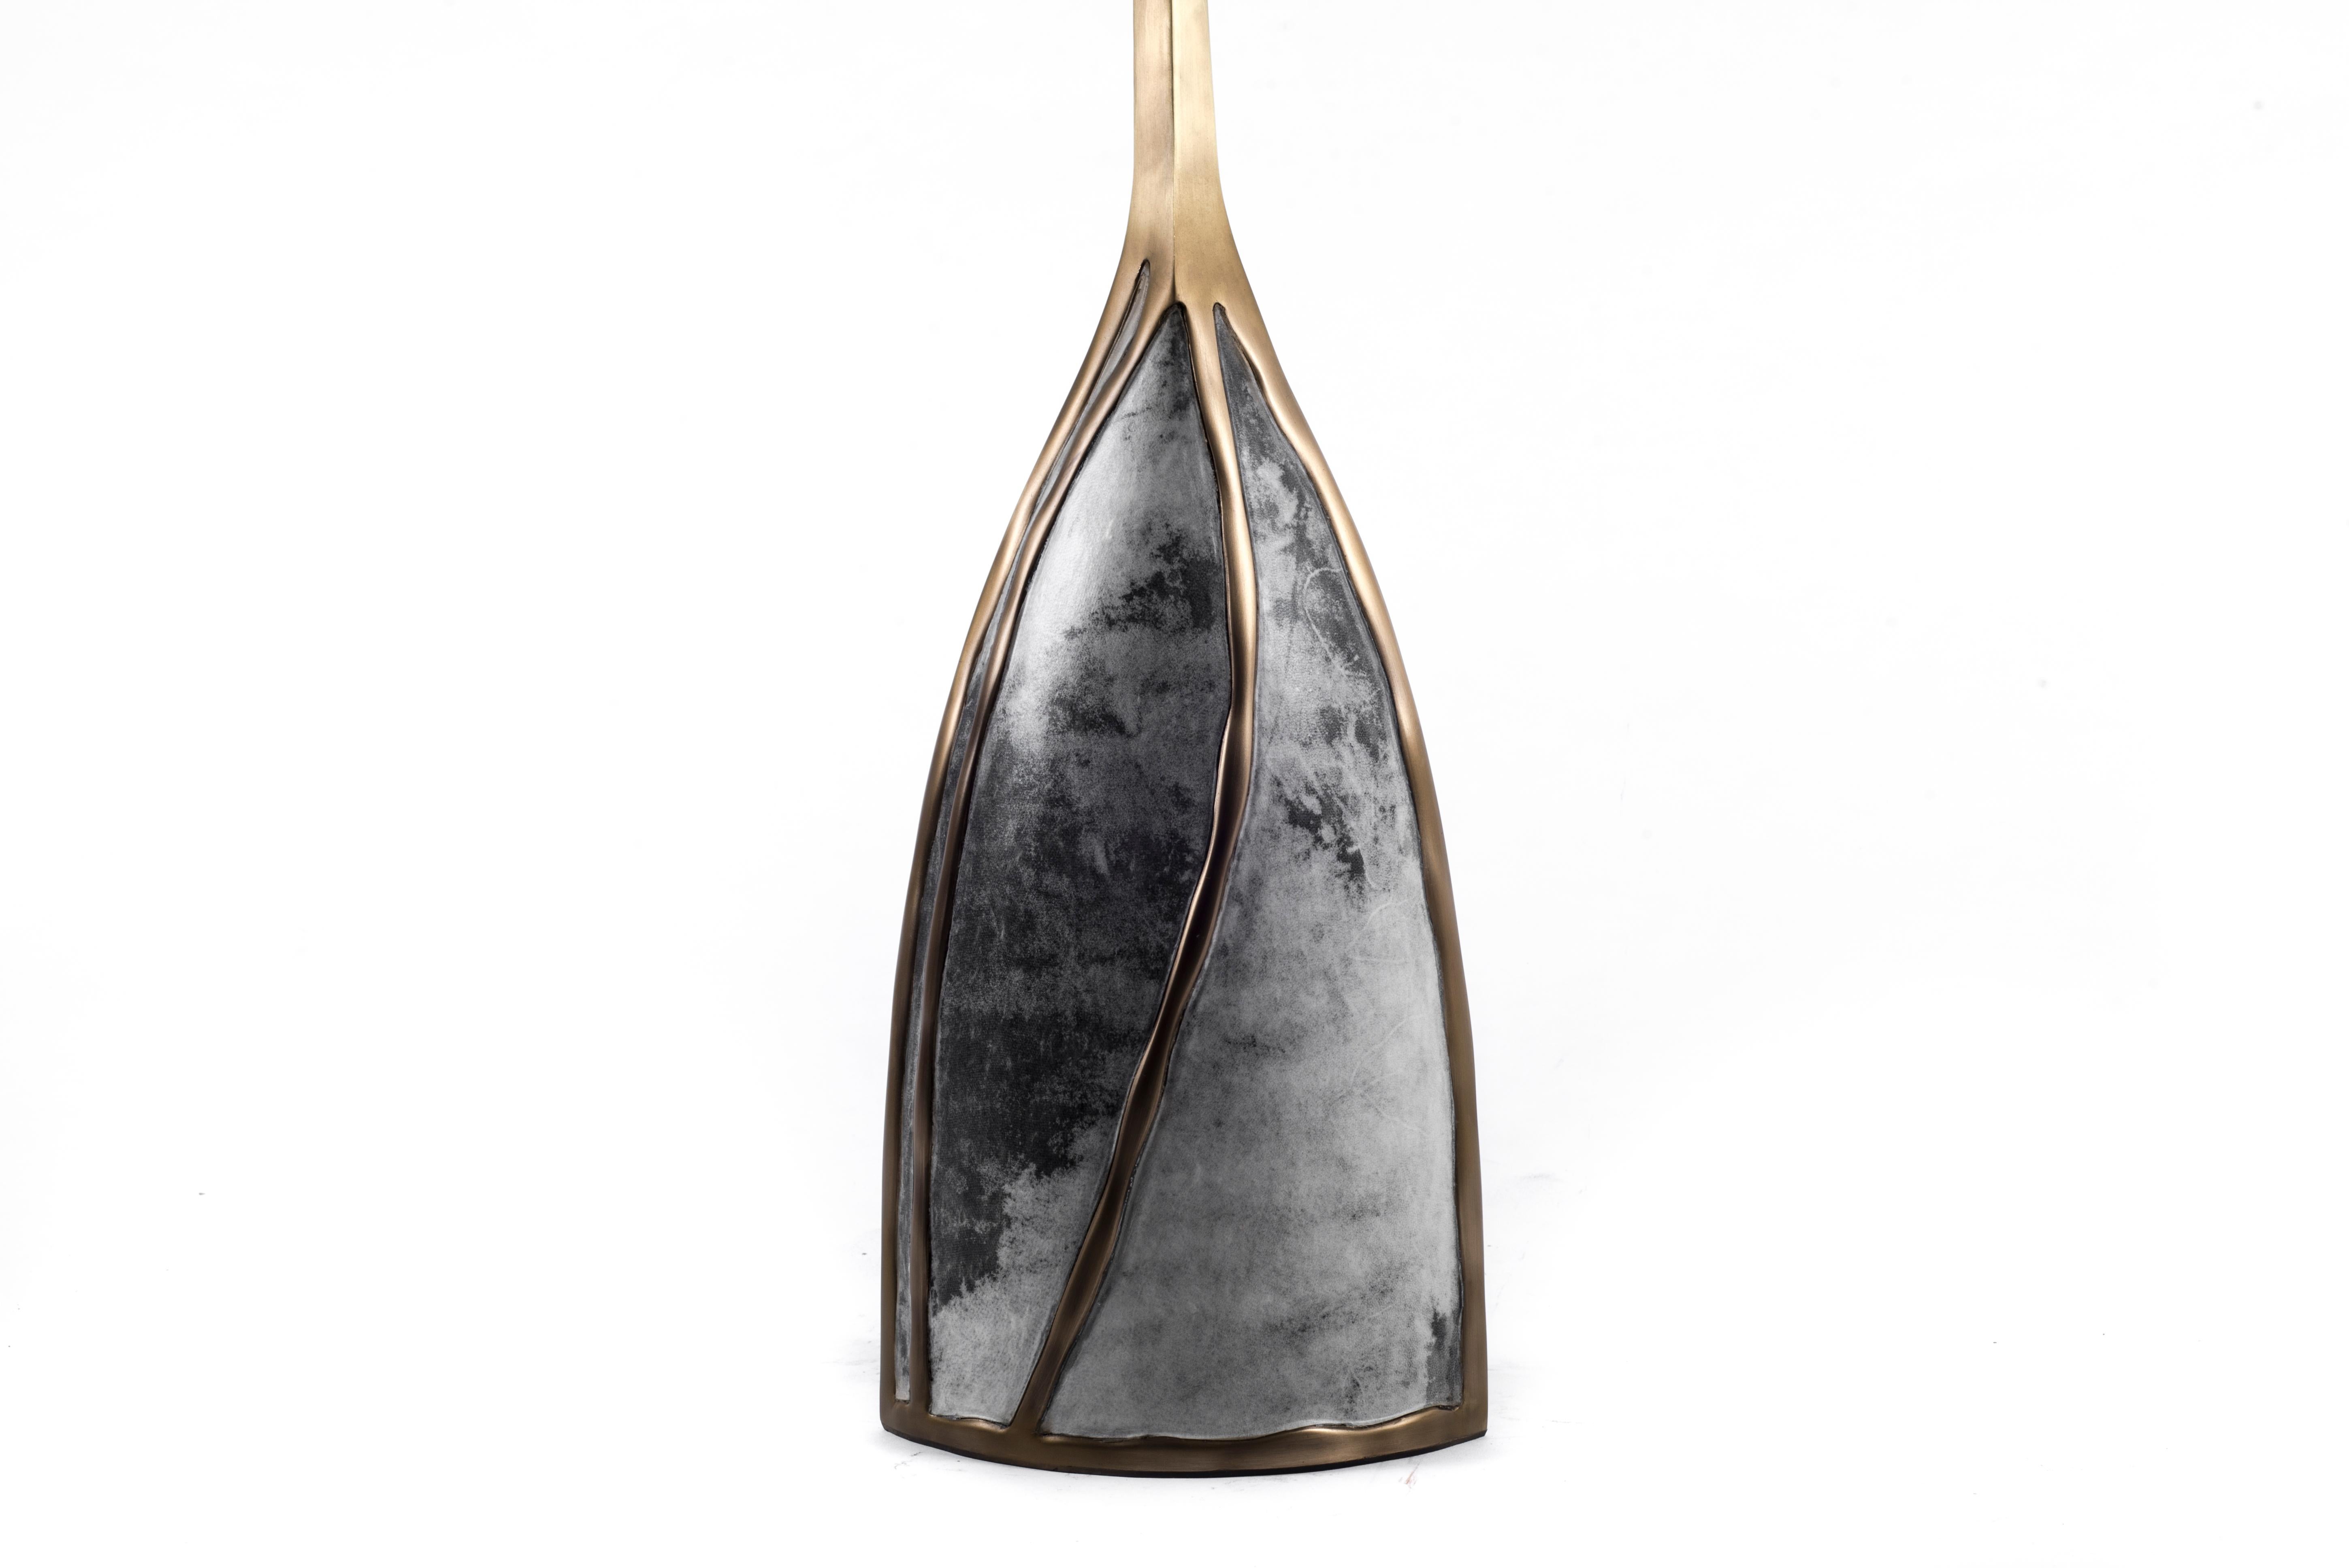 The melting candle base by Patrick Coard is a bold sculptural piece for any space. The intricate uneven surfaced bronze-patina brass structure creates the melting effect, mixed with a smokey dyed parchment inlay. Exotic-textured mineral wax candles